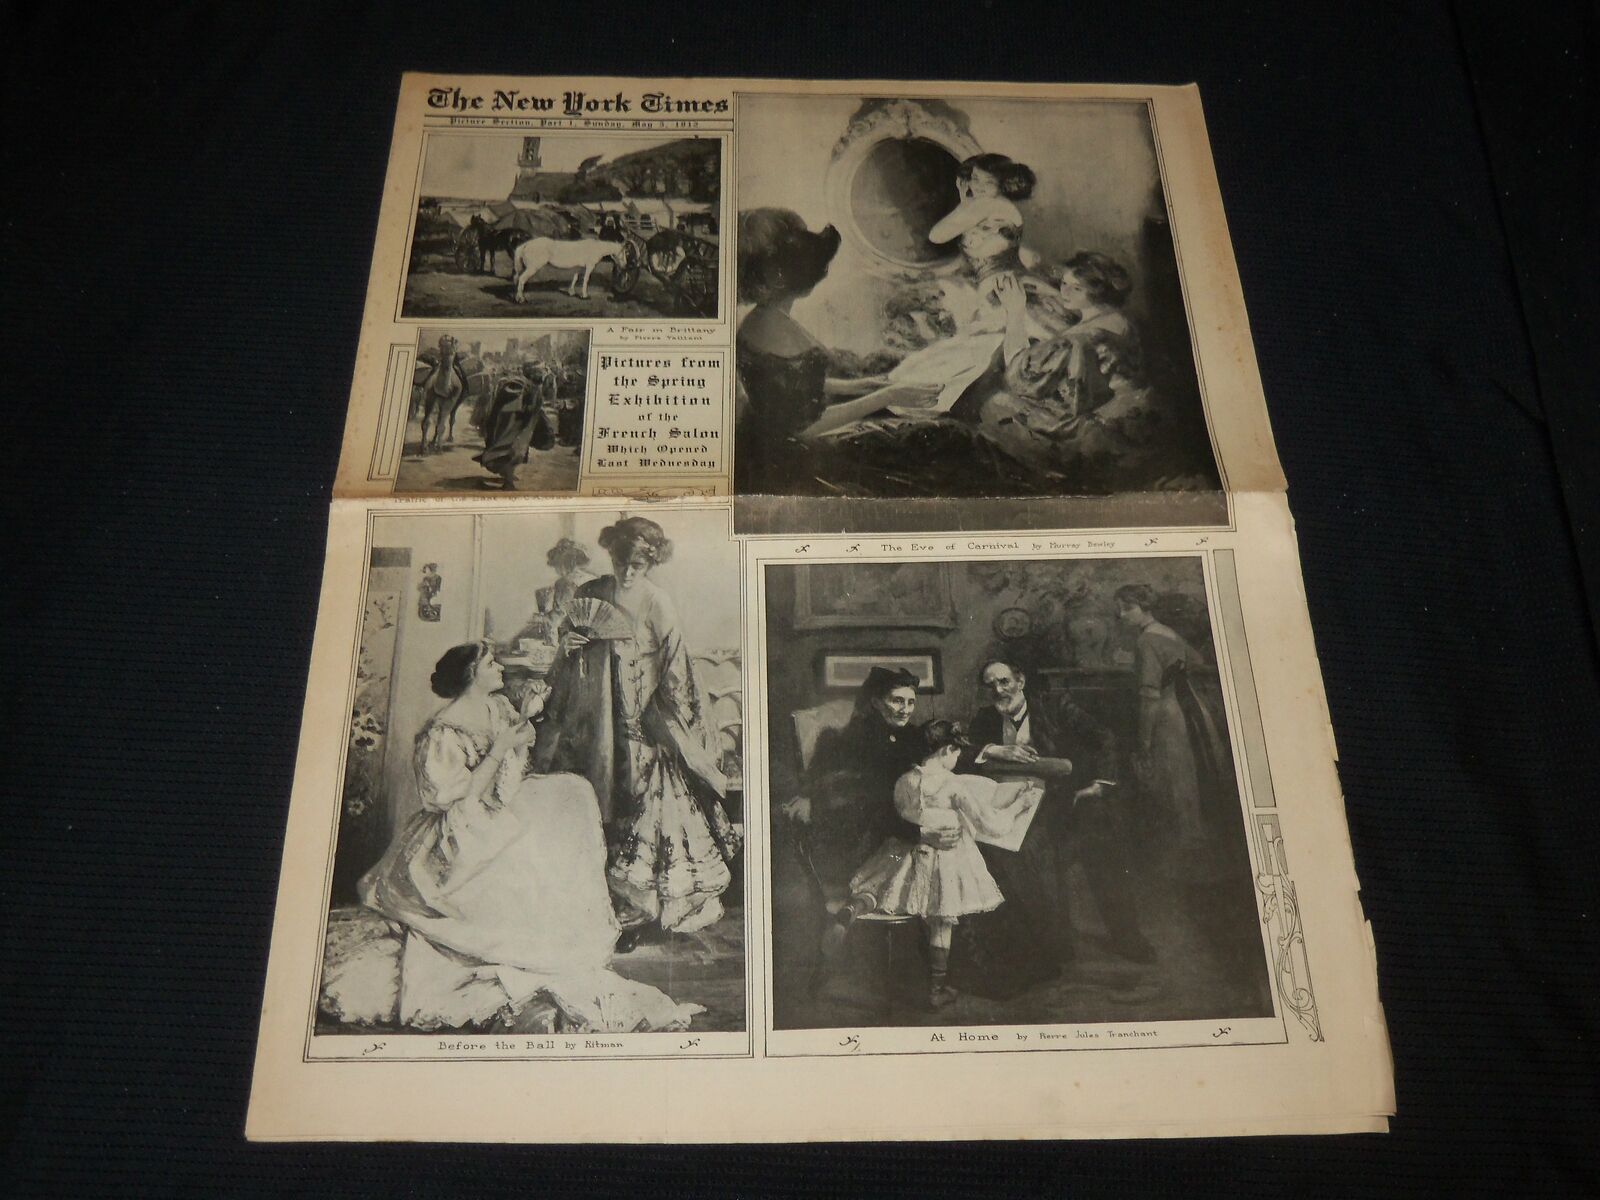 1912 MAY 5 NEW YORK TIMES PICTURE SECTION - FRENCH SALON - NP 5623